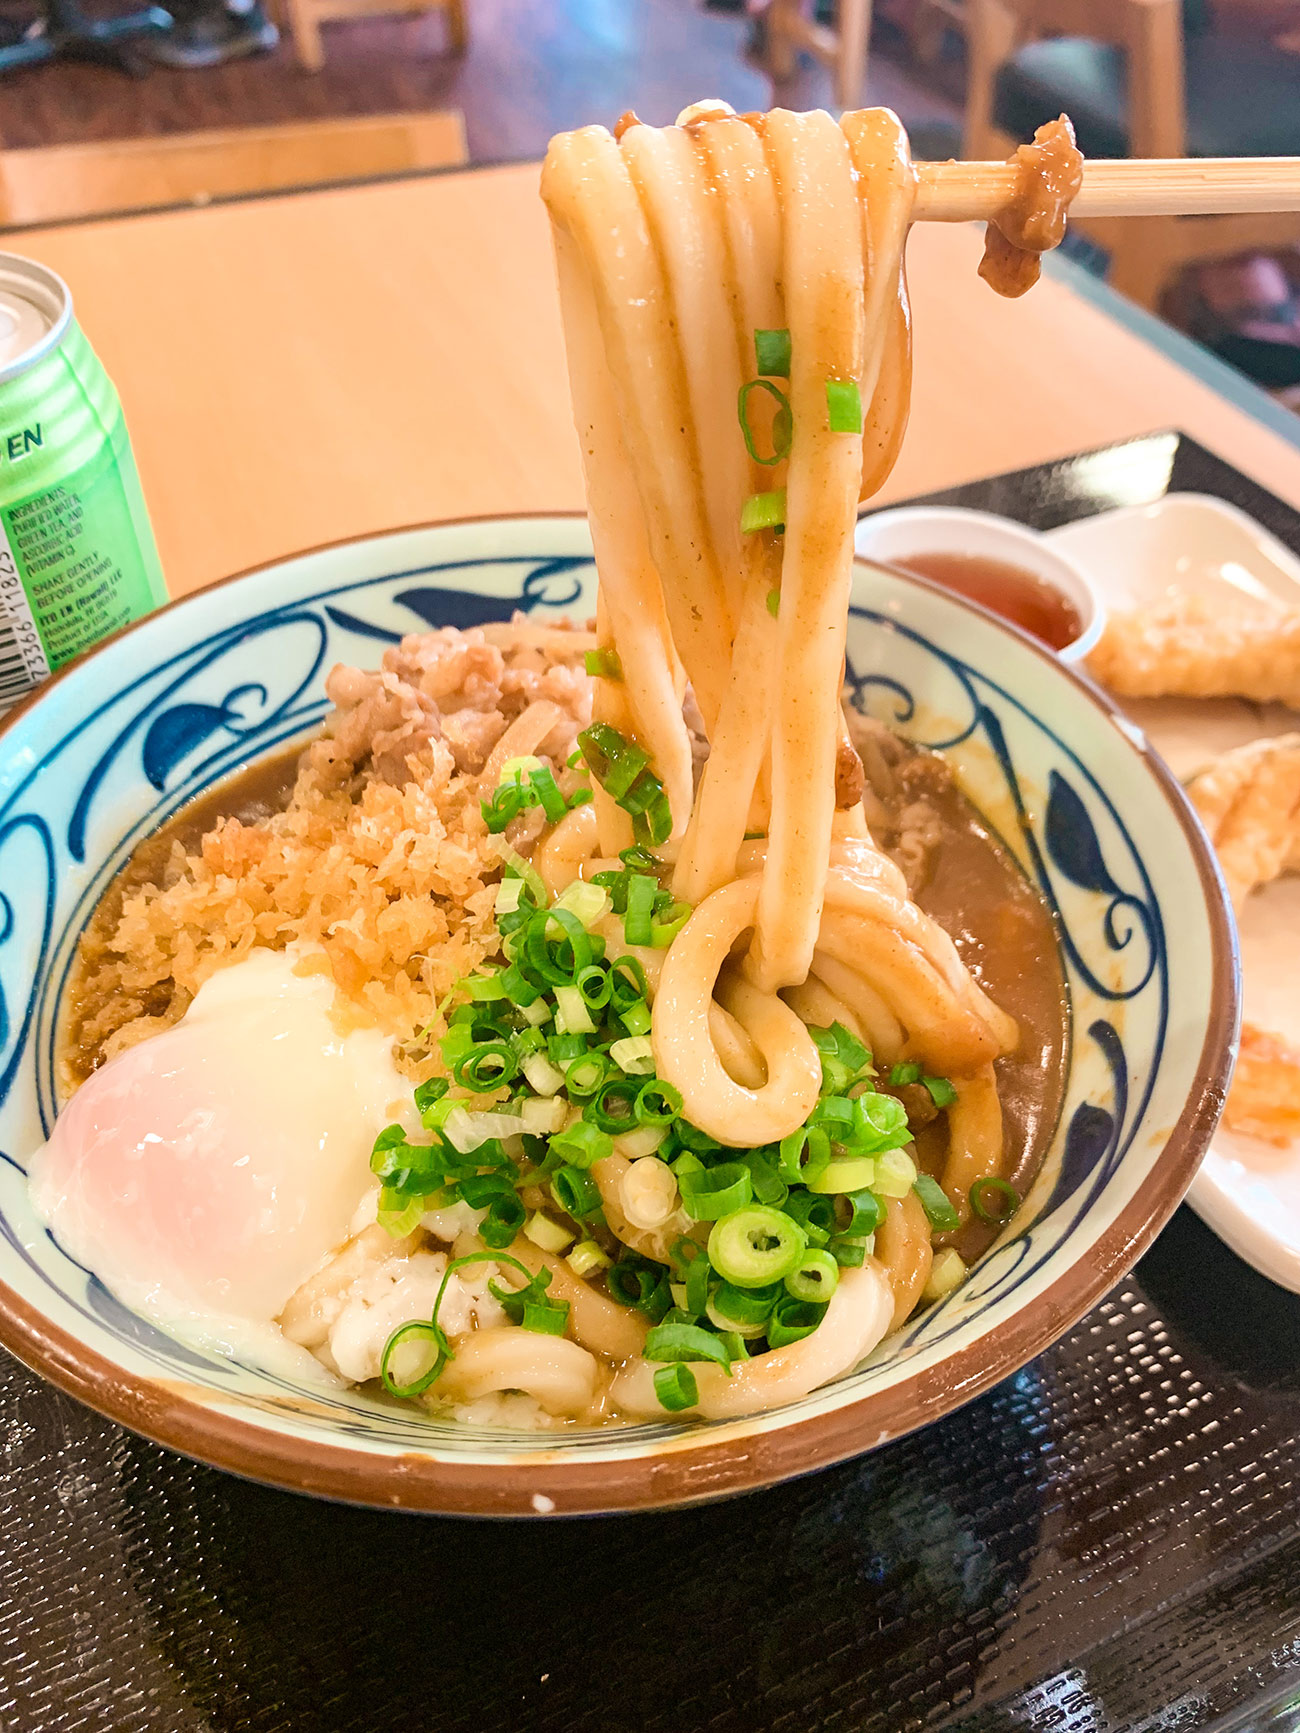 cheap places to eat in waikiki - Marukame Udon